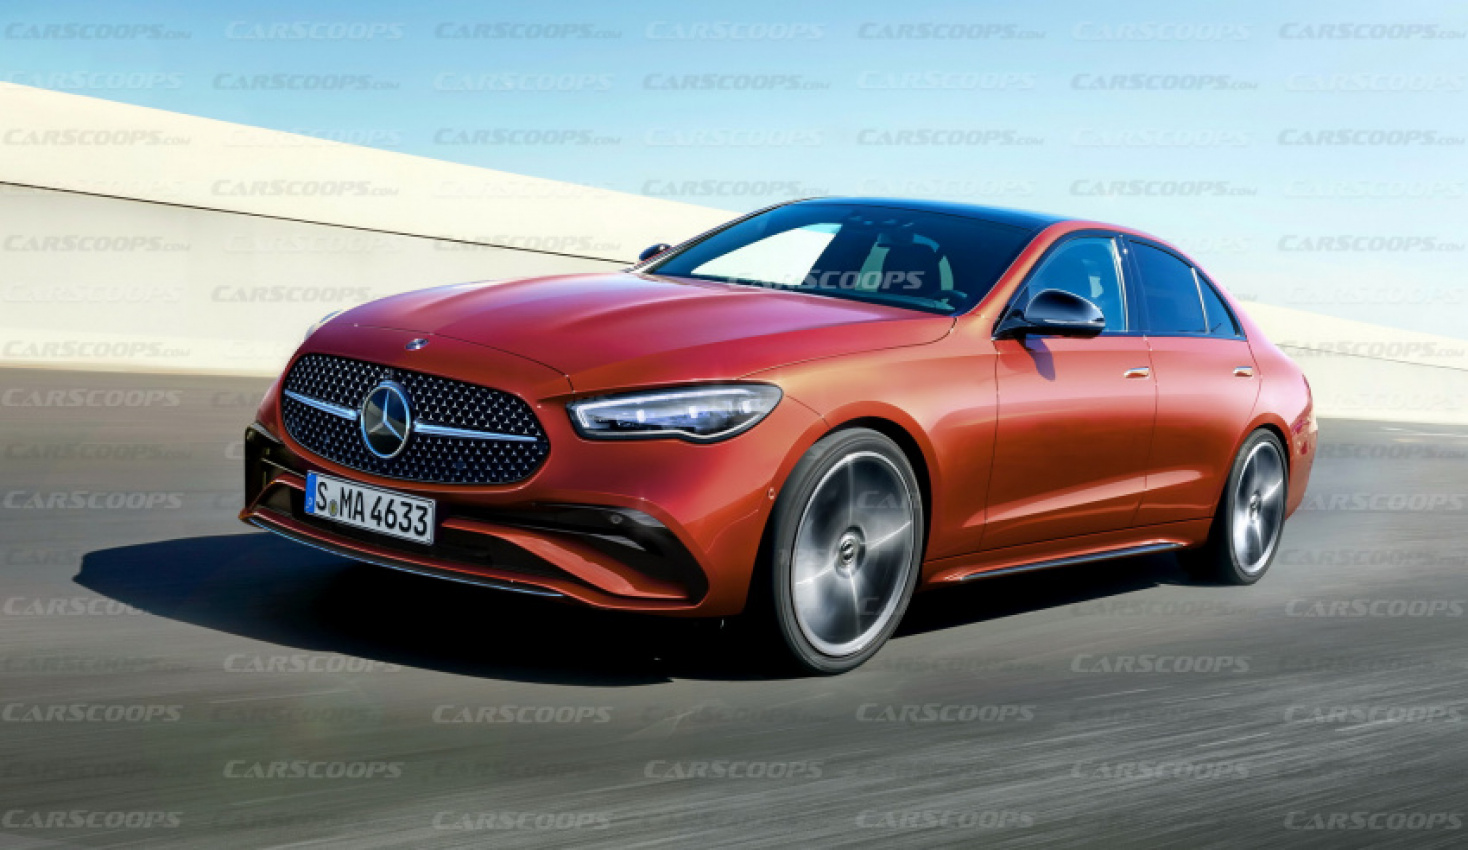 Image 2024 Mercedes Benz E Class Everything We Know About The Next Gen Luxury Sedan And Wagon 164852659398035 